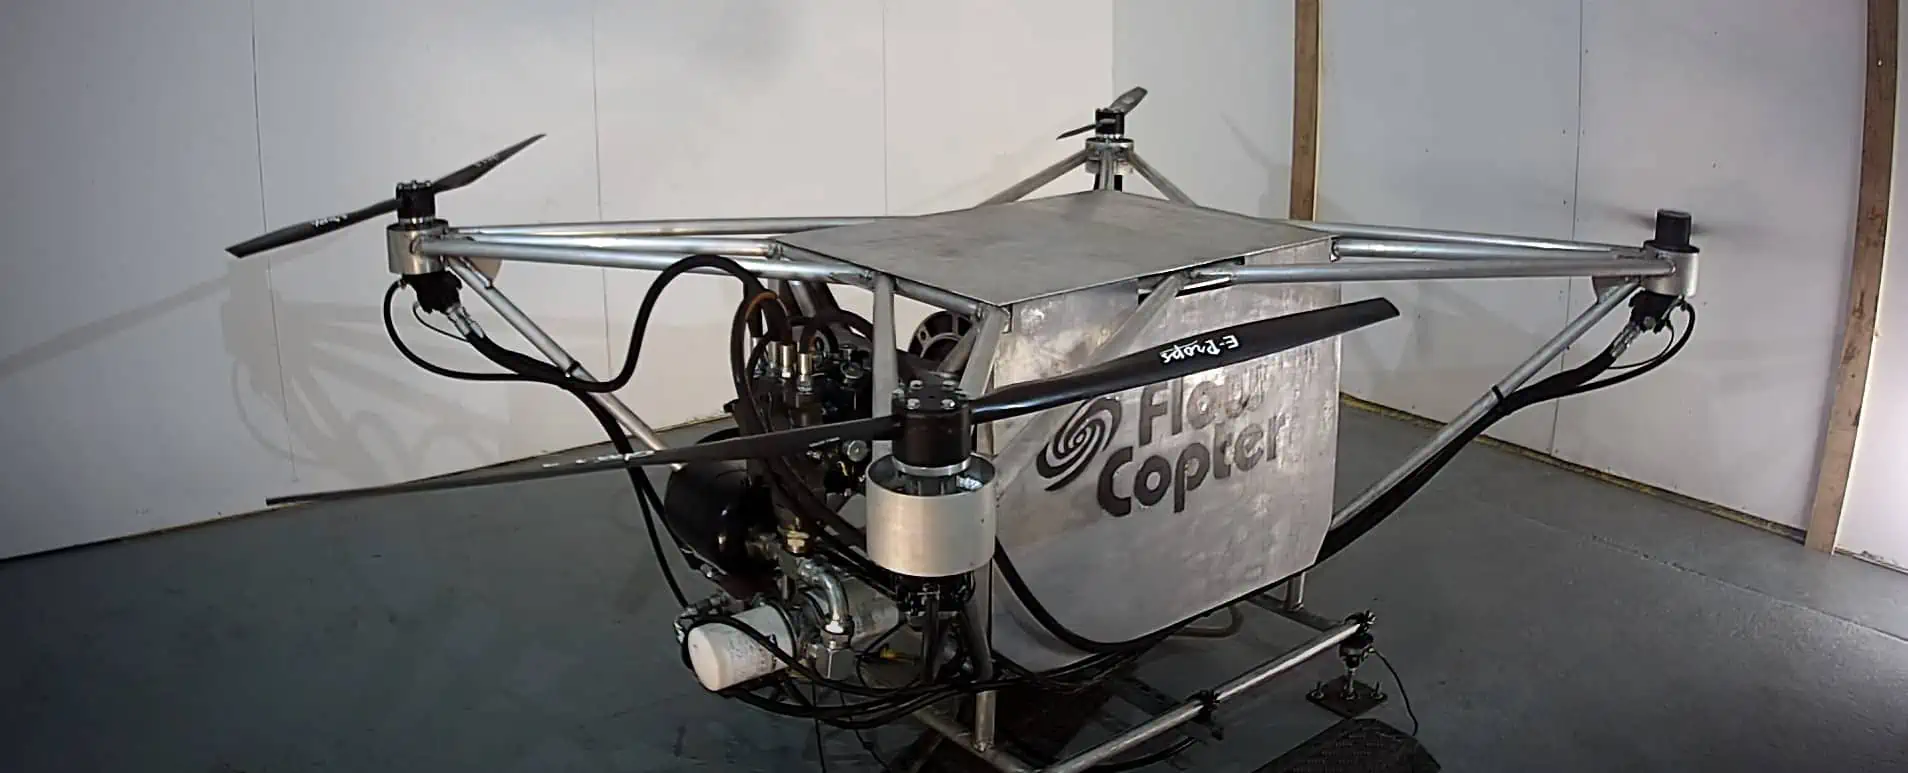 Flowcopter drone cargo